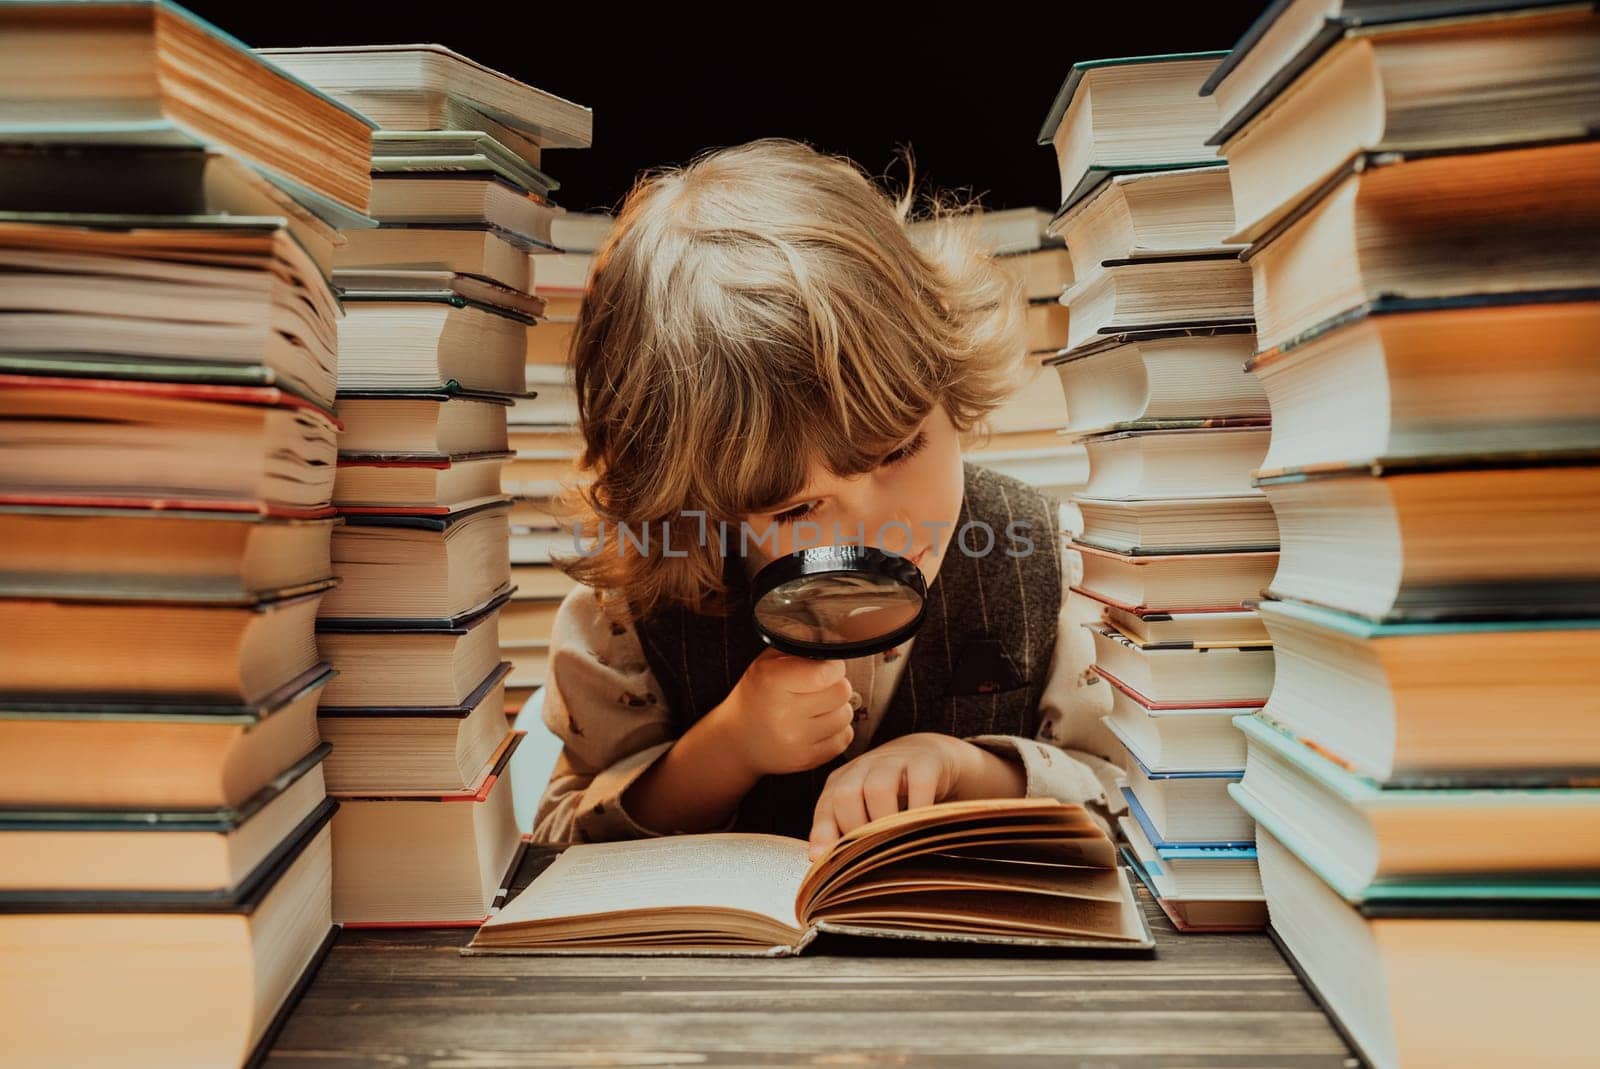 Little researcher boy reads book with magnifying glass in library. Cute clever preschooler playing, studying knowledge with instrument. High quality